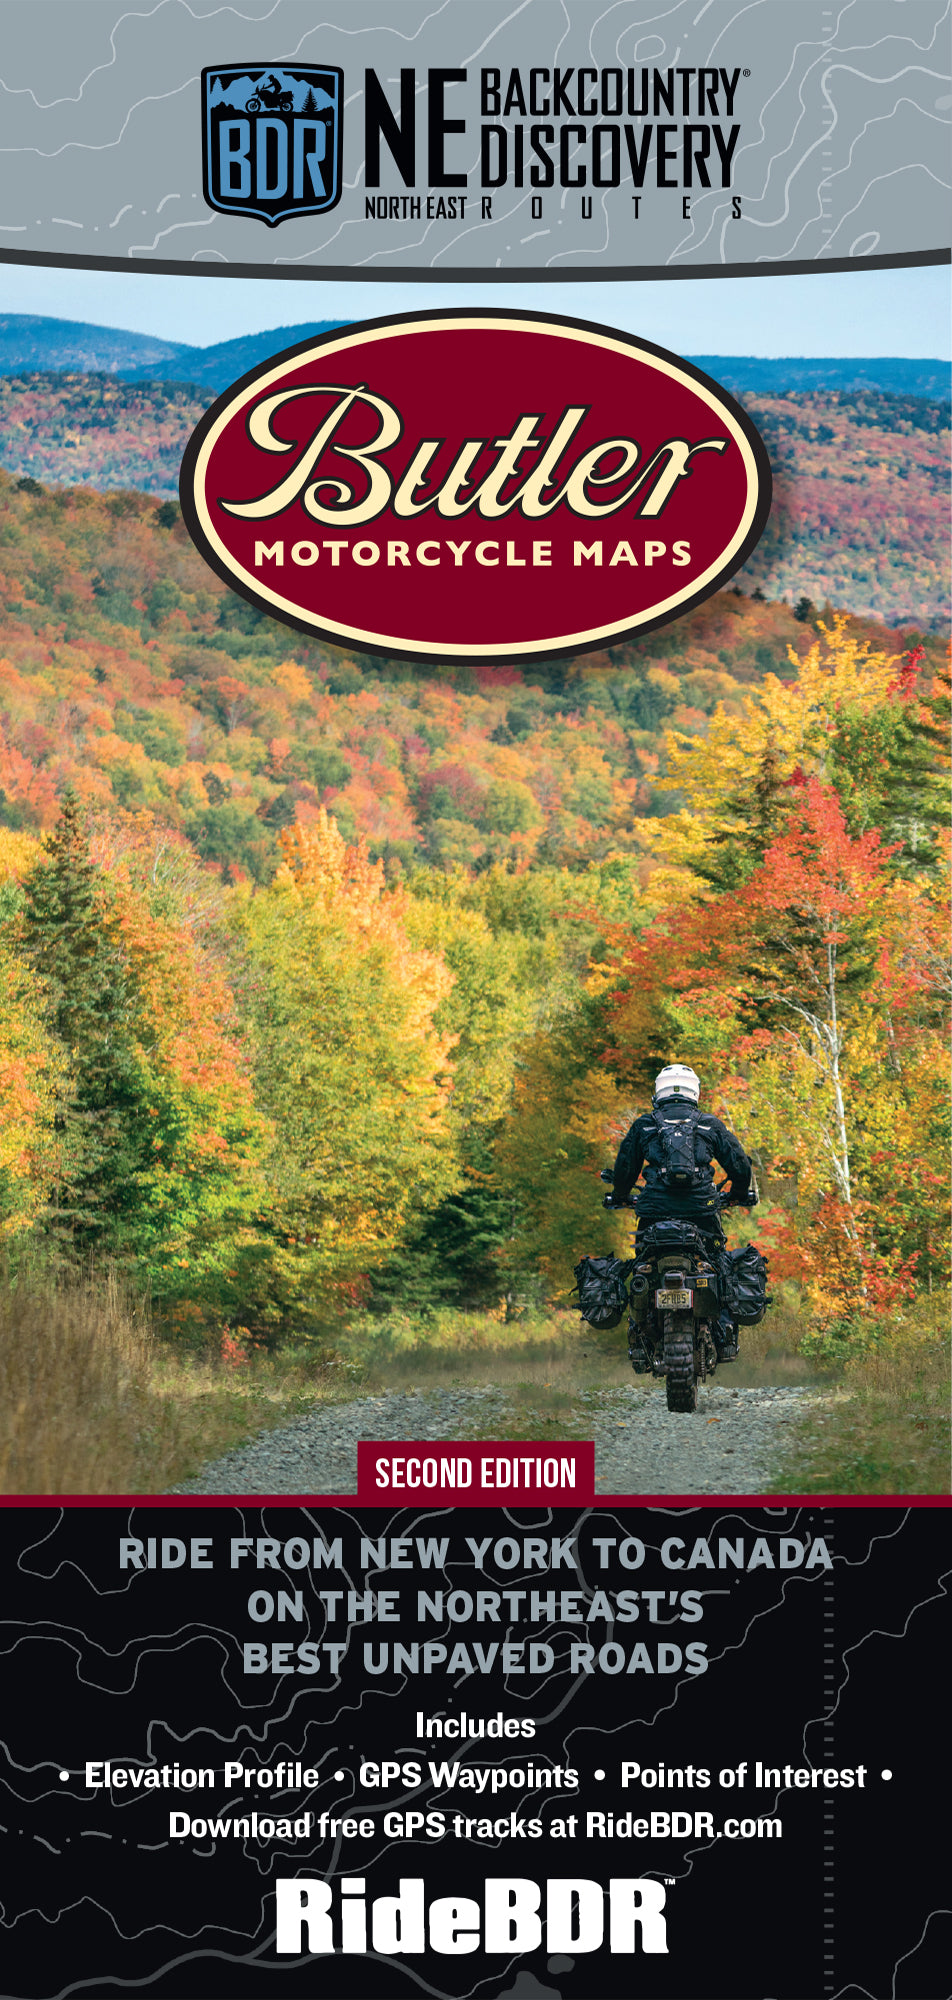 Northeast Backcountry Discovery Route (NEBDR) Map